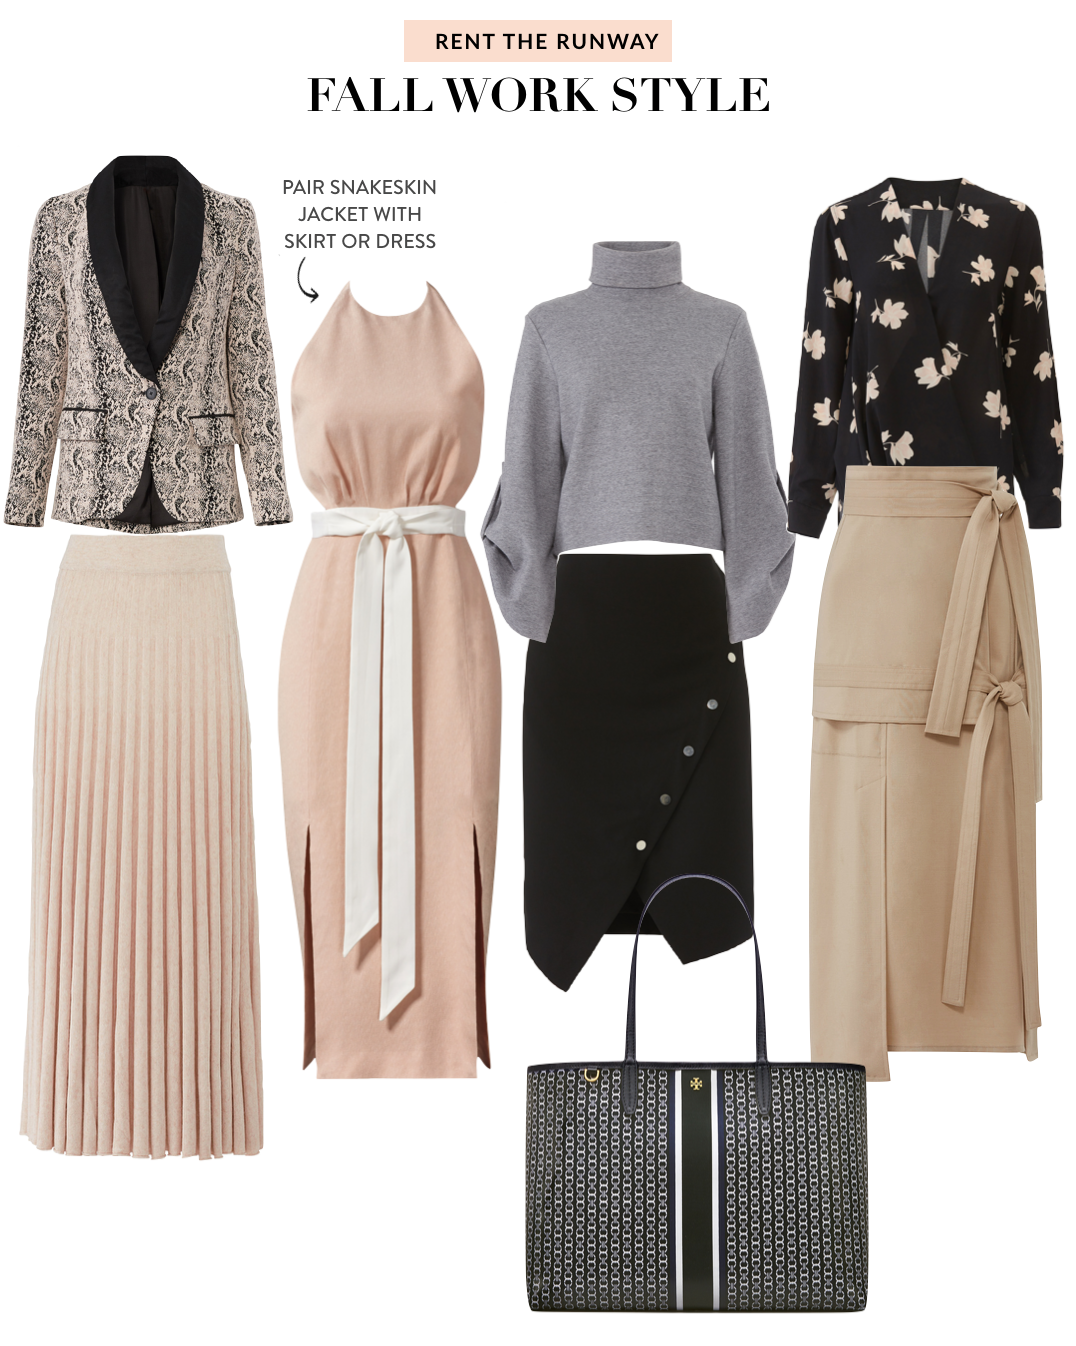 Rent the Runway Review - Fall Work Style